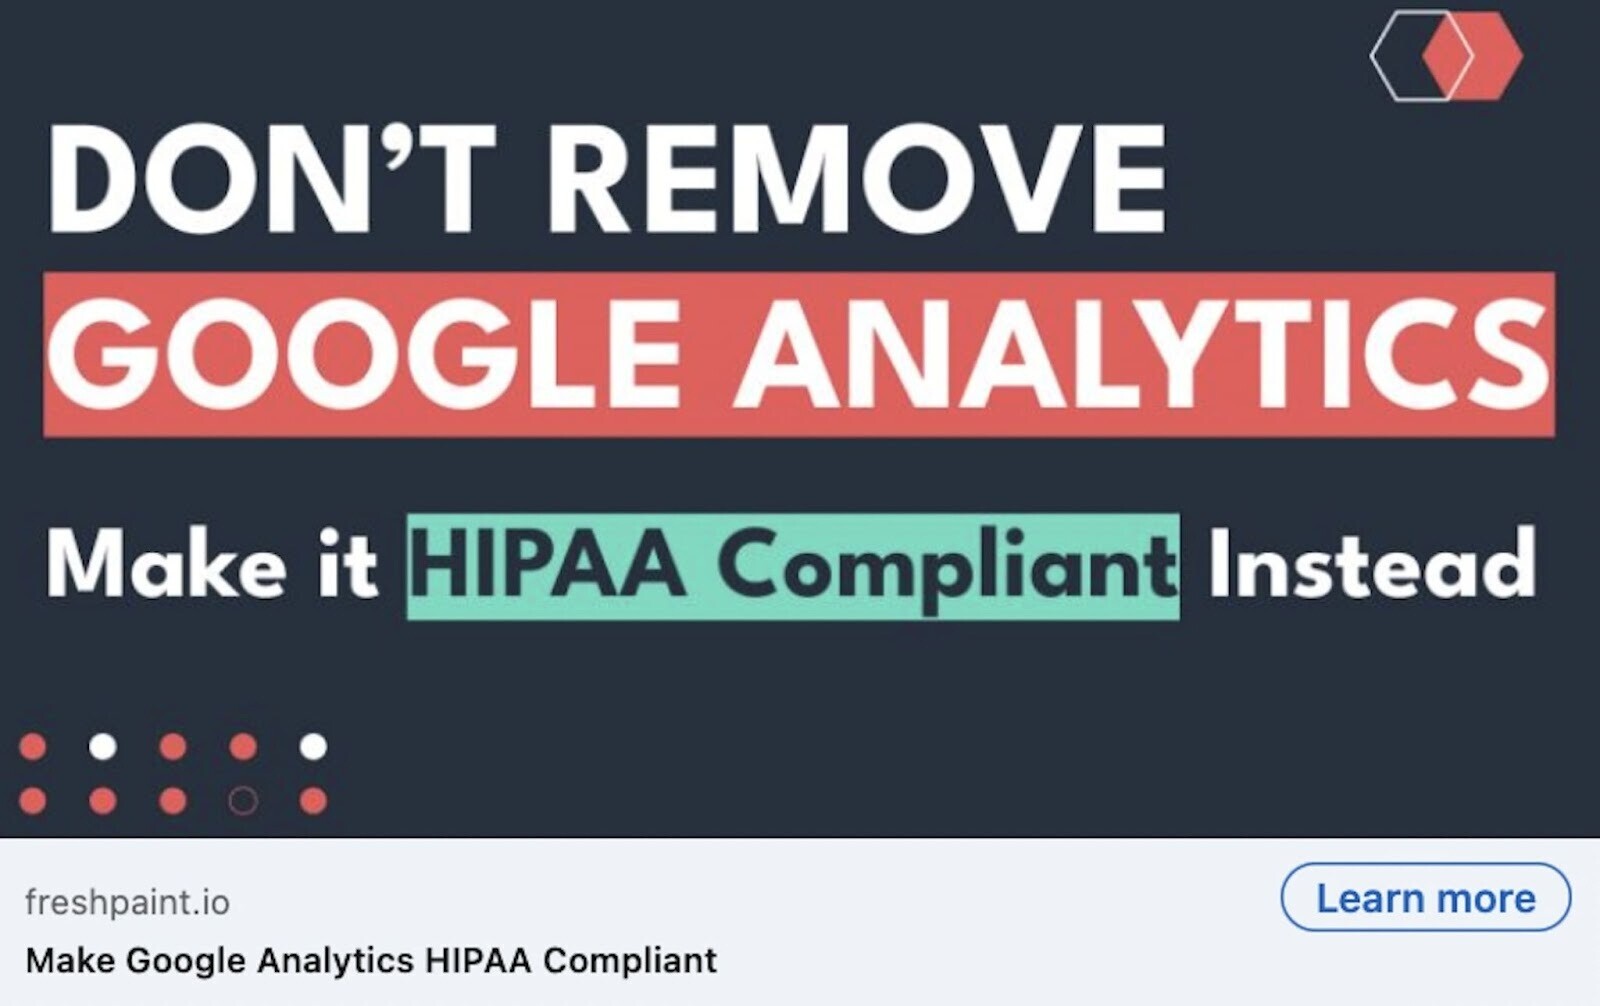 a blog post titled "Don’t remove Google Analytics. Make it HIPAA compliant"